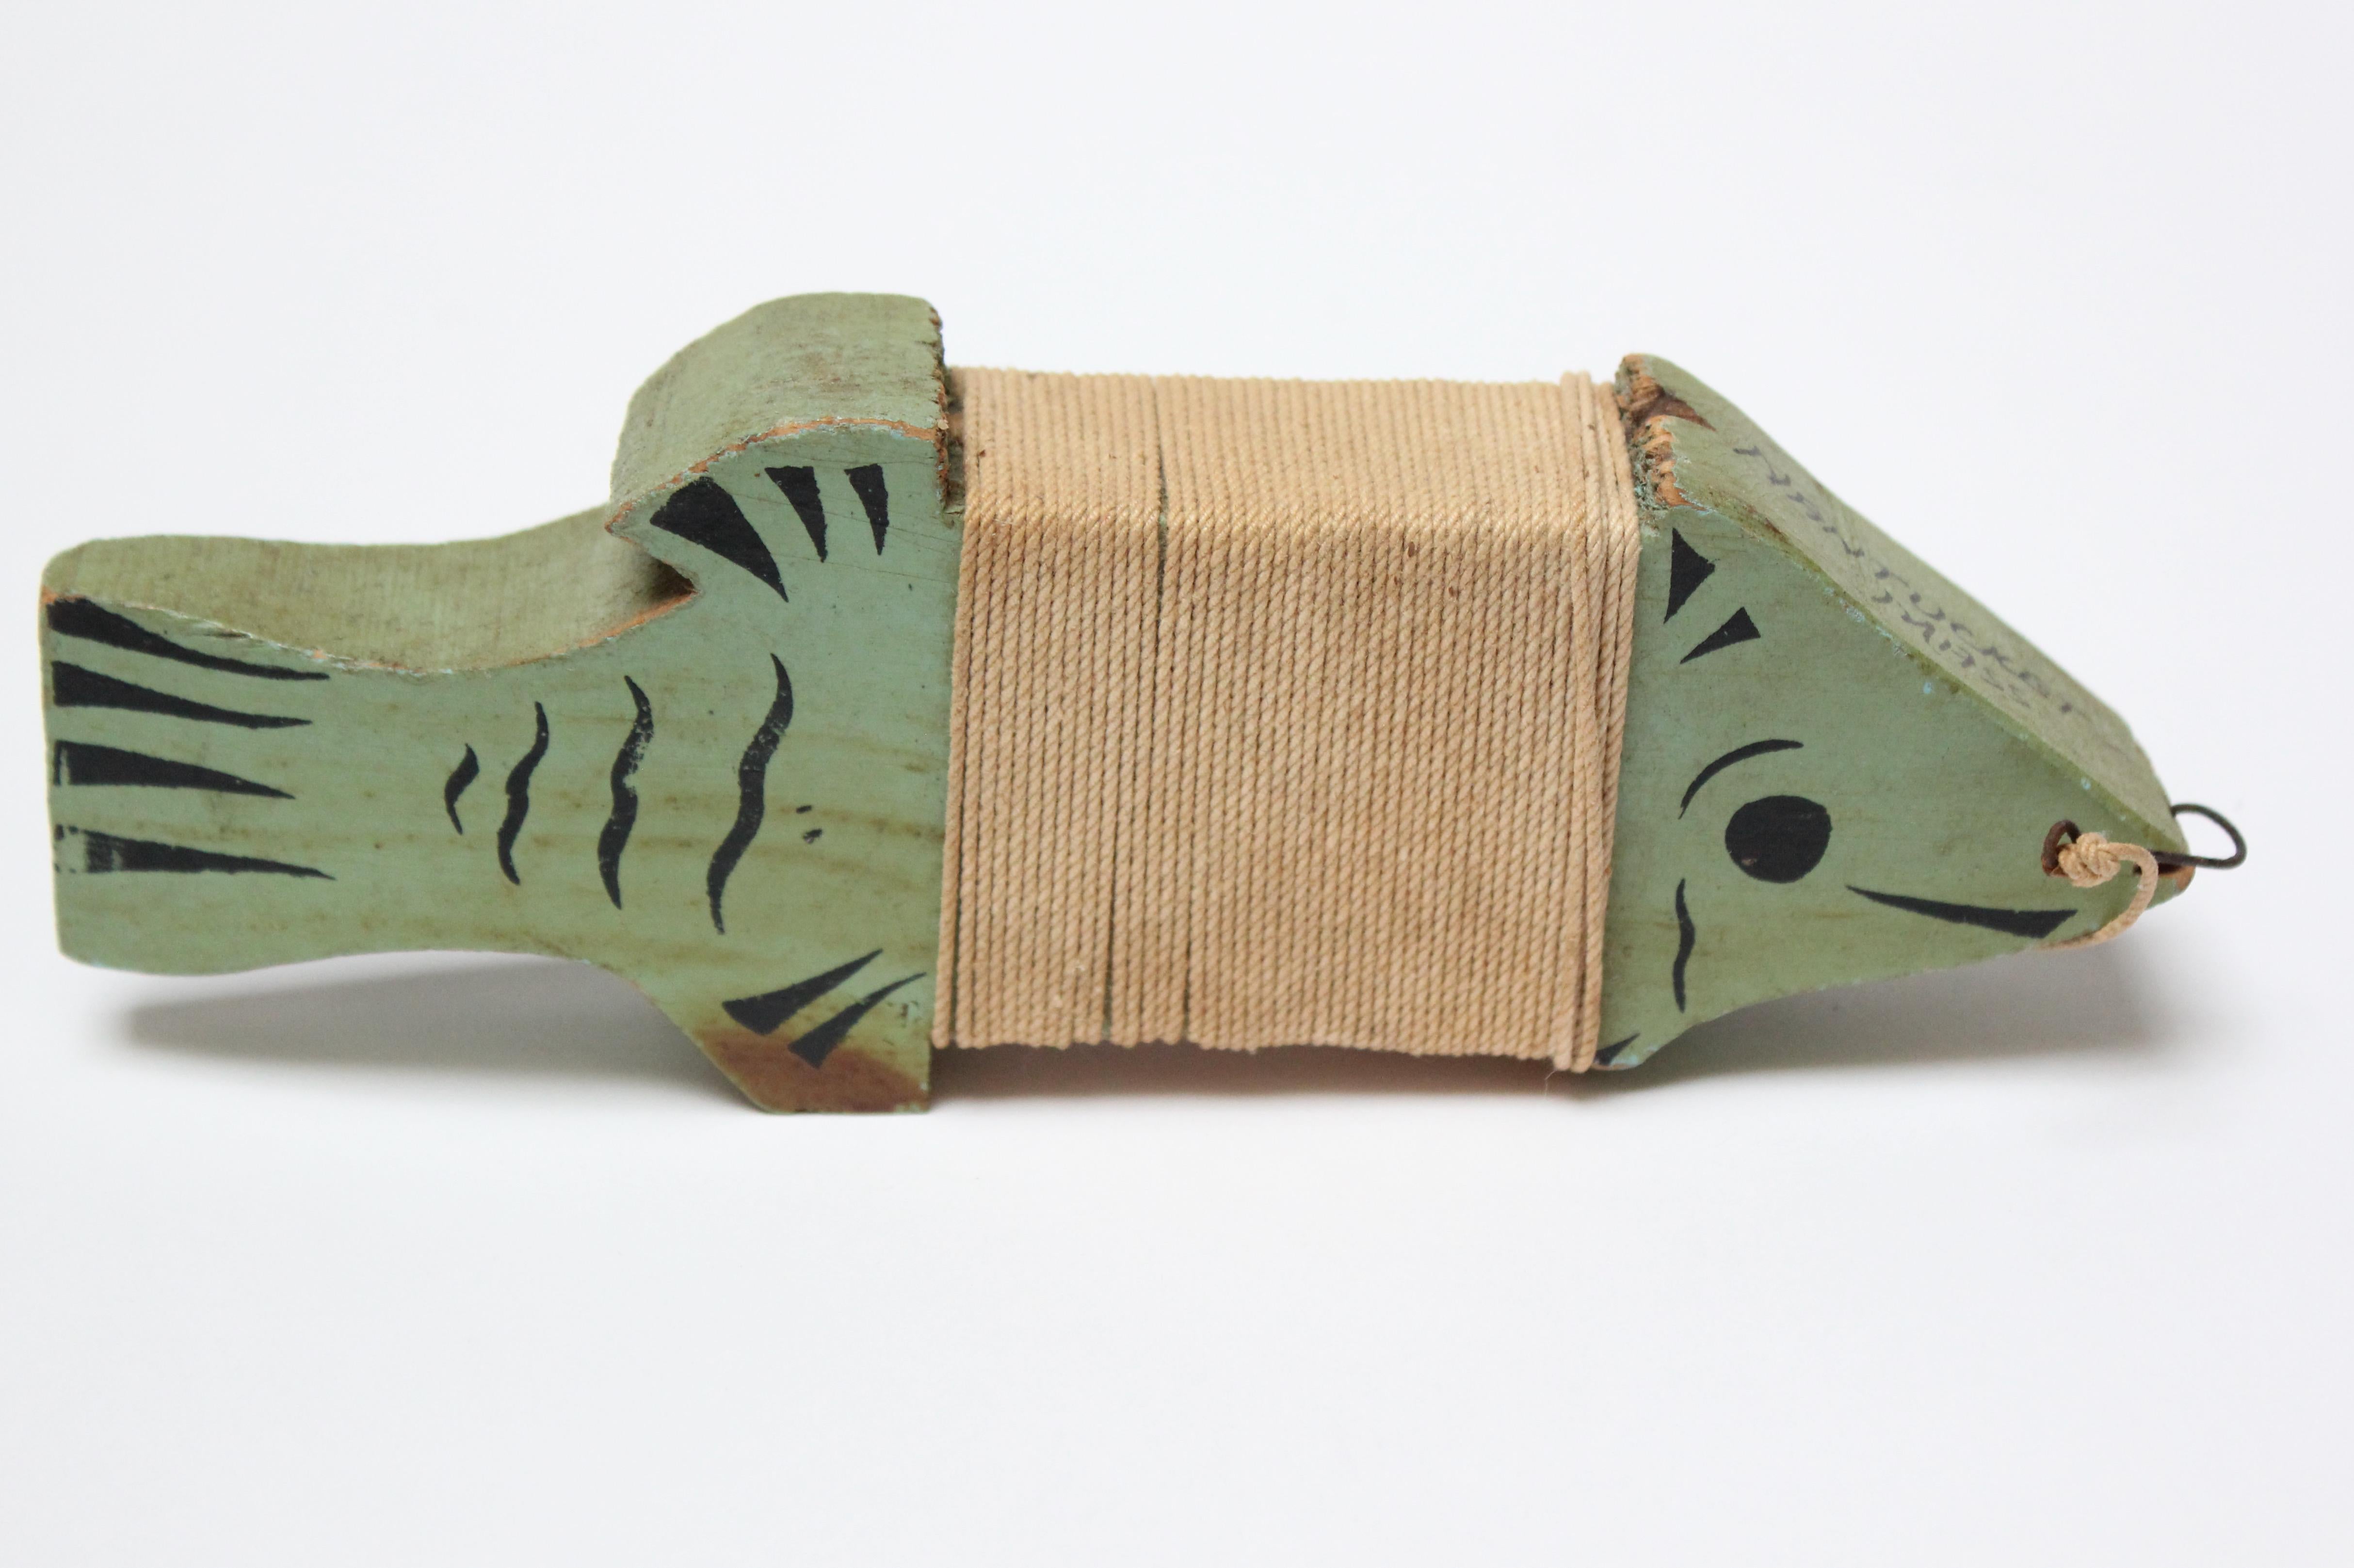 Hand carved and painted mint green fish souvenir spool from Nantucket Island (ca. 1940s, MA, USA). The fishing twine is connected to a small metal hook affixed to the fish's mouth. Warm patina / good age commensurate with history (small spots of